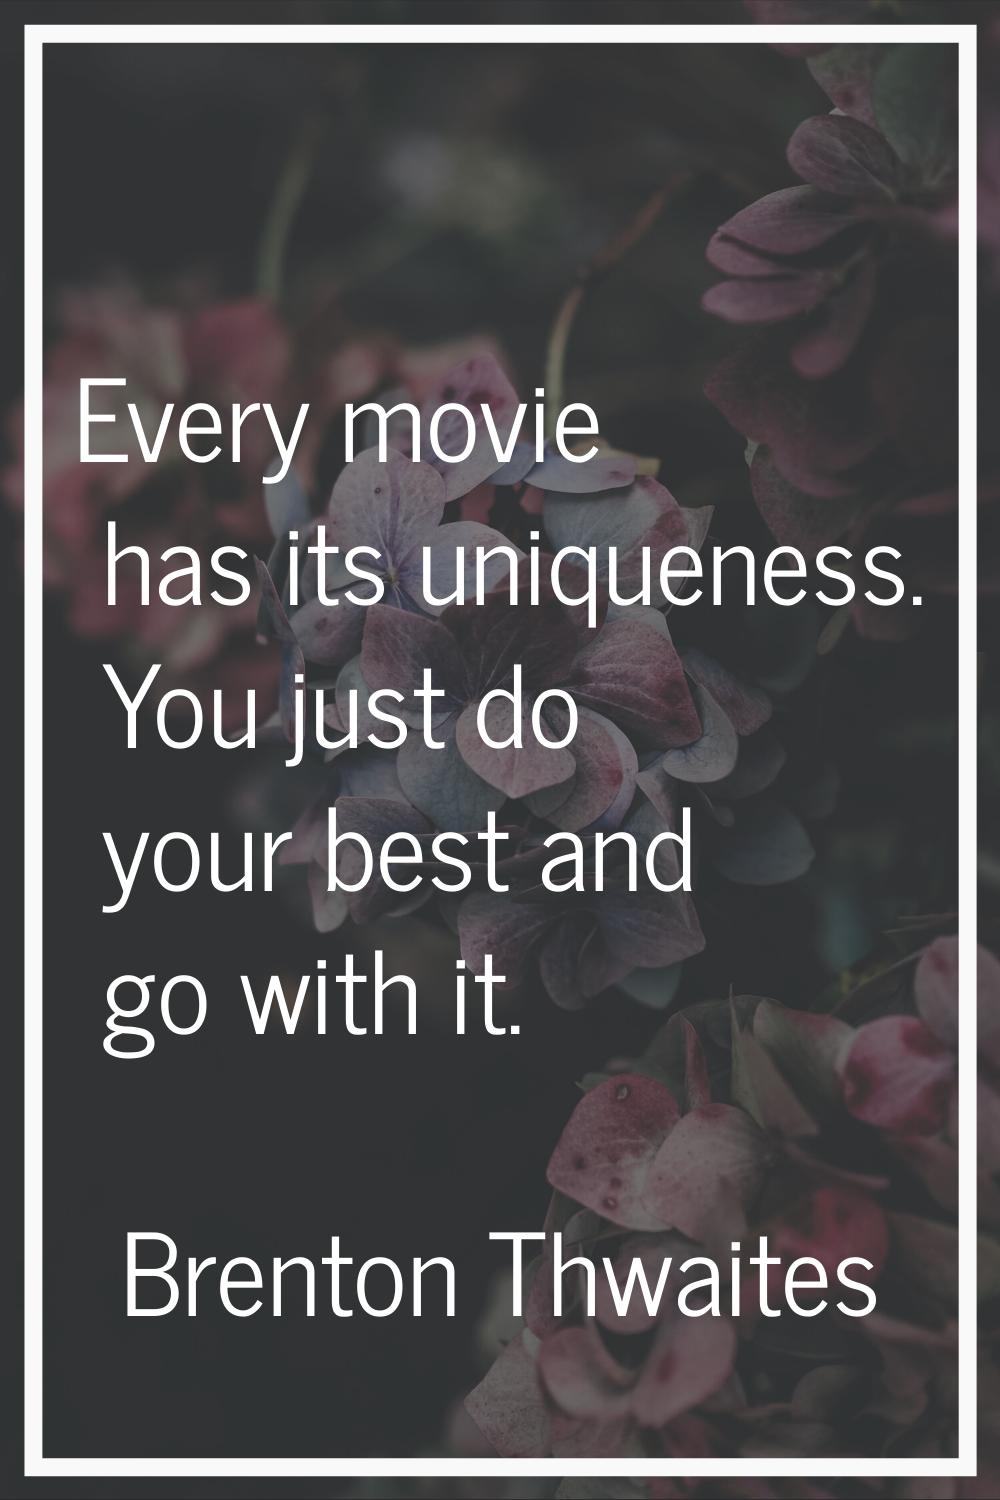 Every movie has its uniqueness. You just do your best and go with it.